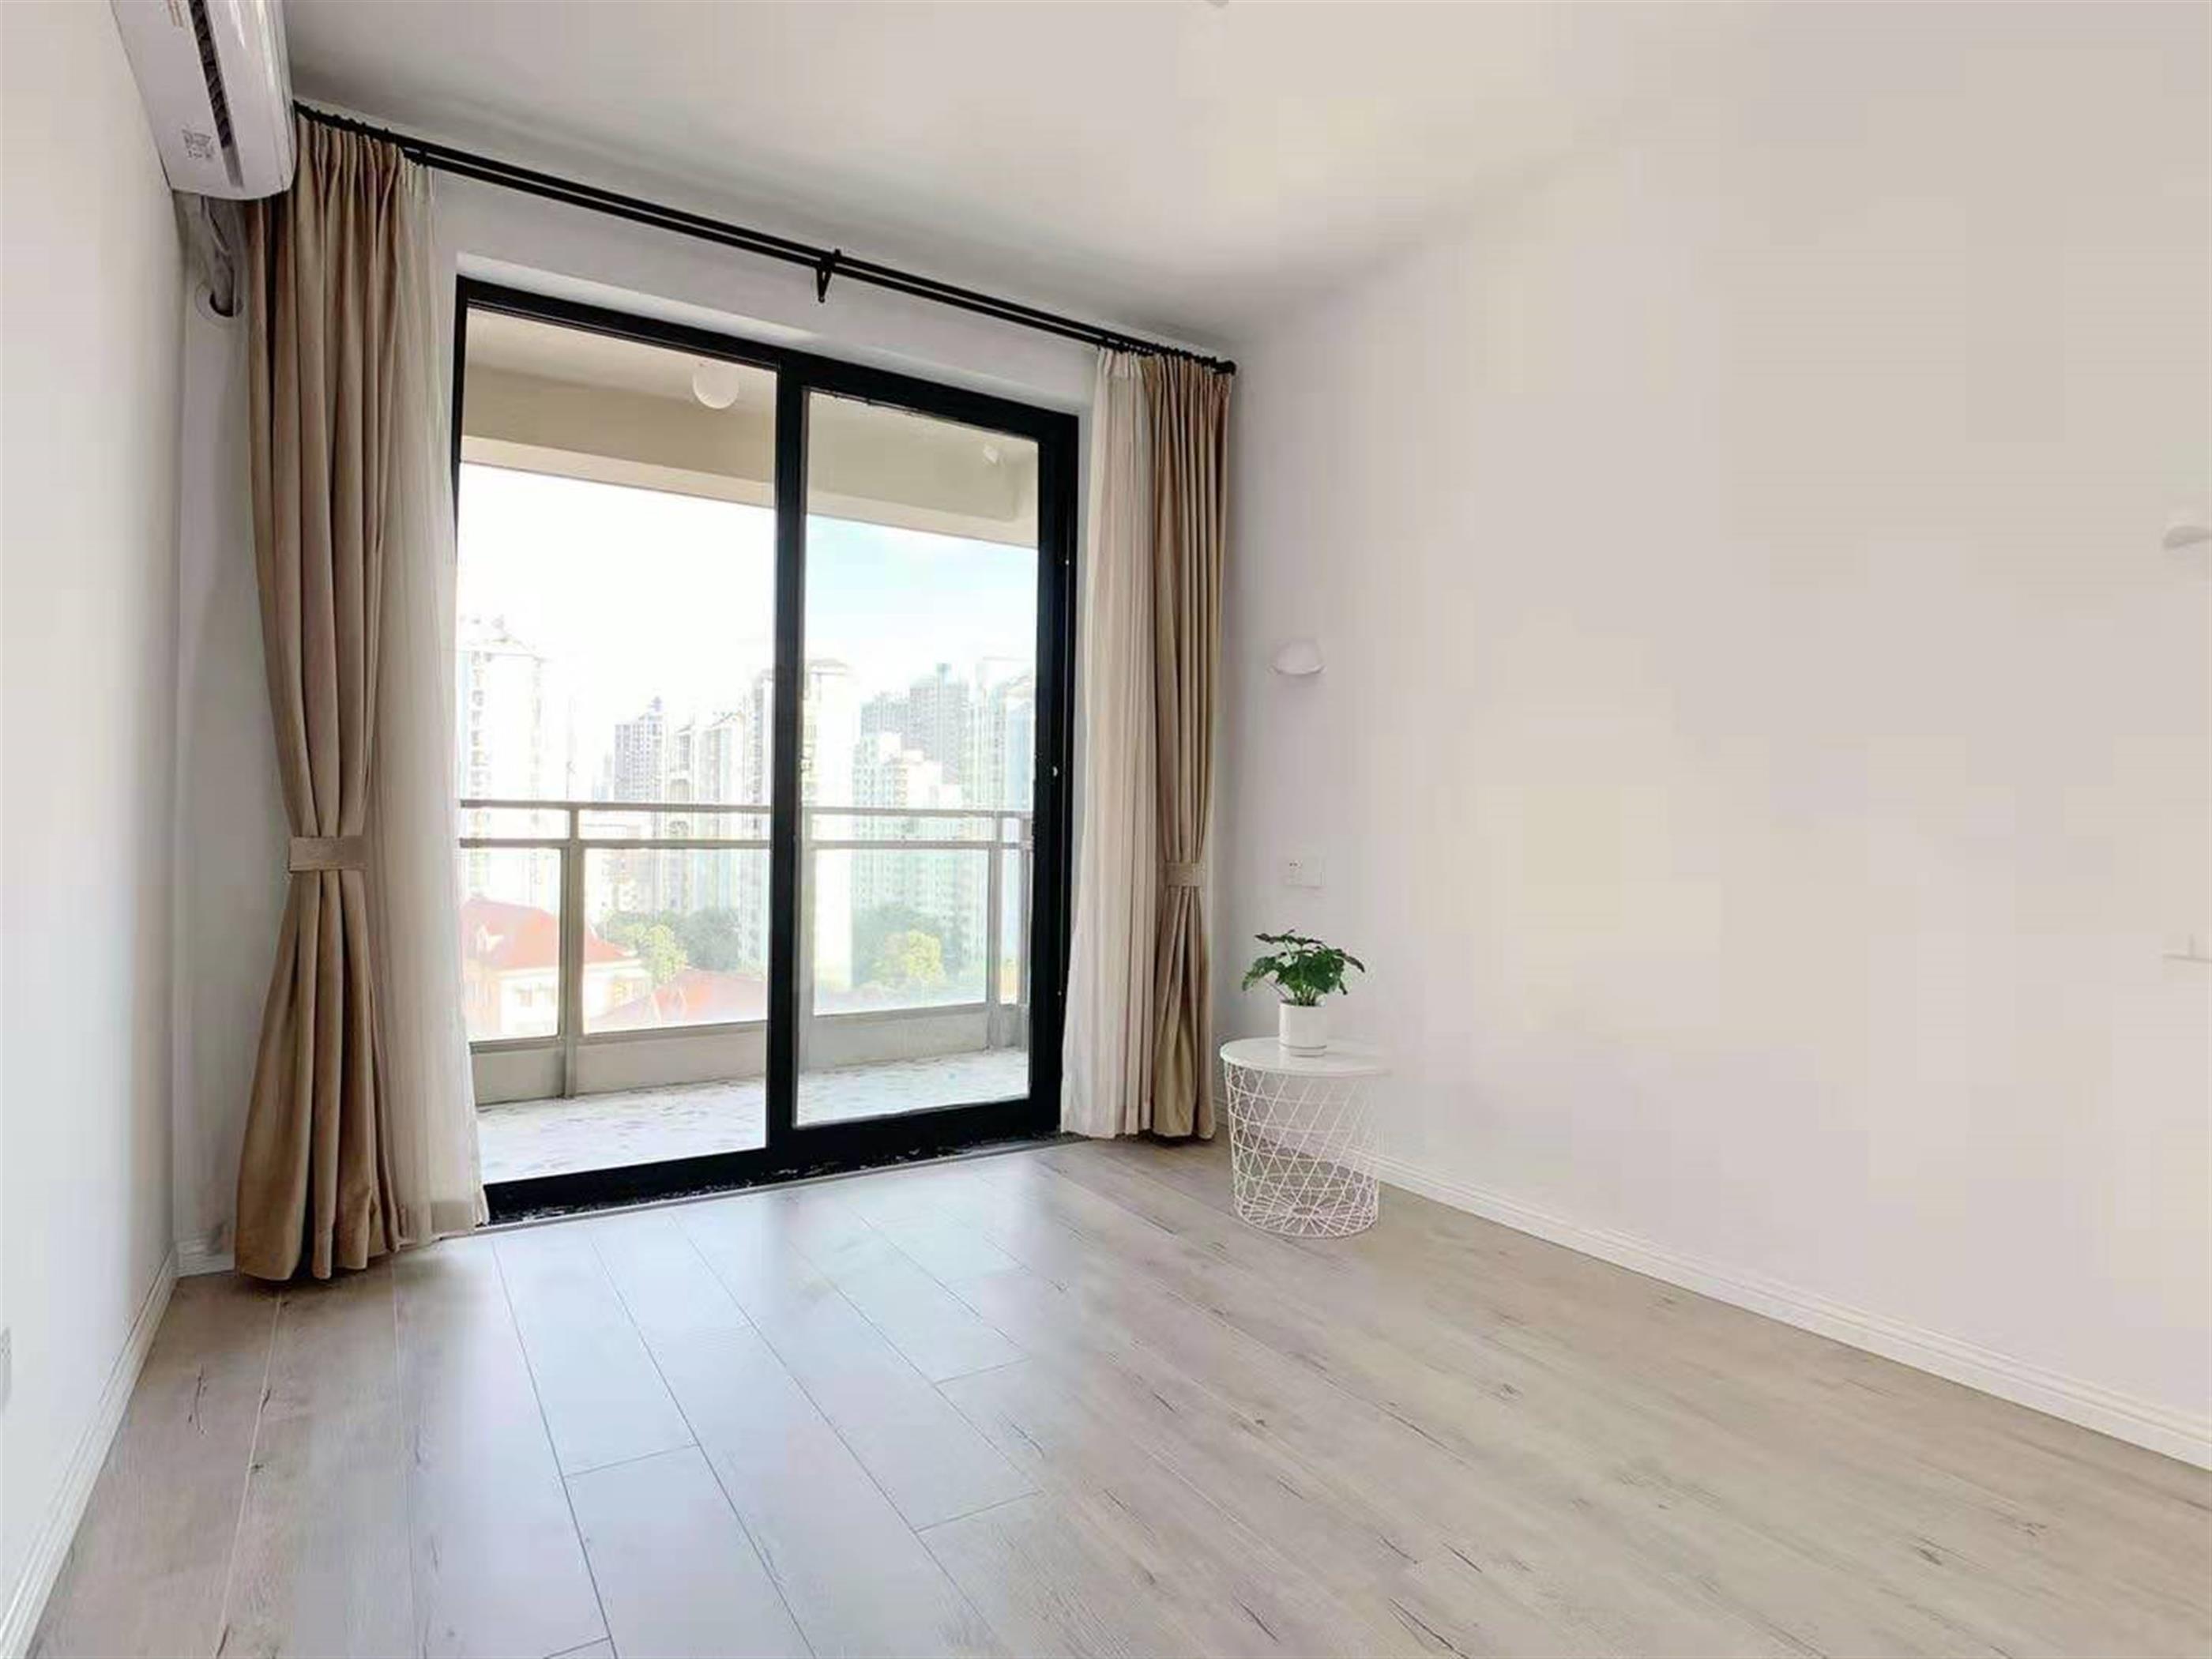 Bright Rooms Modern Bright Spacious Suzhou Creek Apartment for Rent in Jing